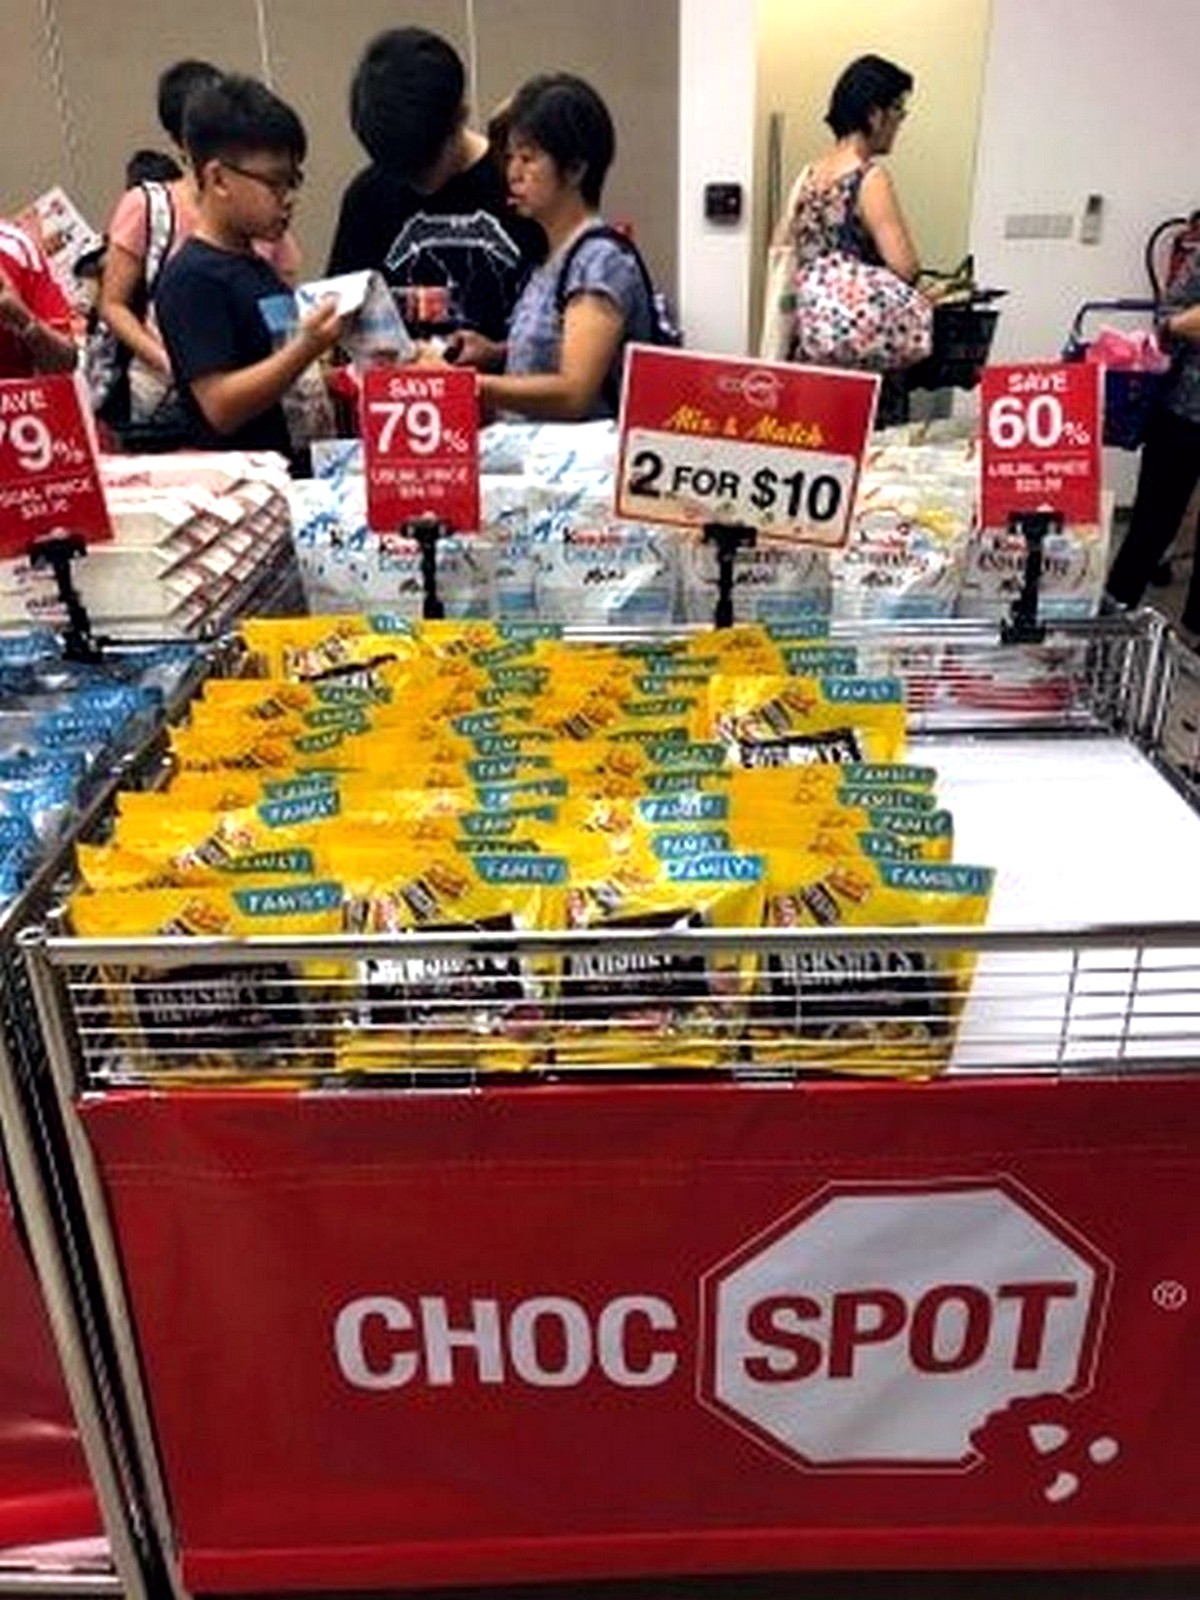 Choc-Spot-Warehouse-Sale-Singapore-2020-Clearance-Chocolate-Candy-Discounts-006 24 Jul-2 Aug 2020: Choc Spot Warehouse Sale! Up to 80% off Chocolates, Sweets, Chips, Biscuits!